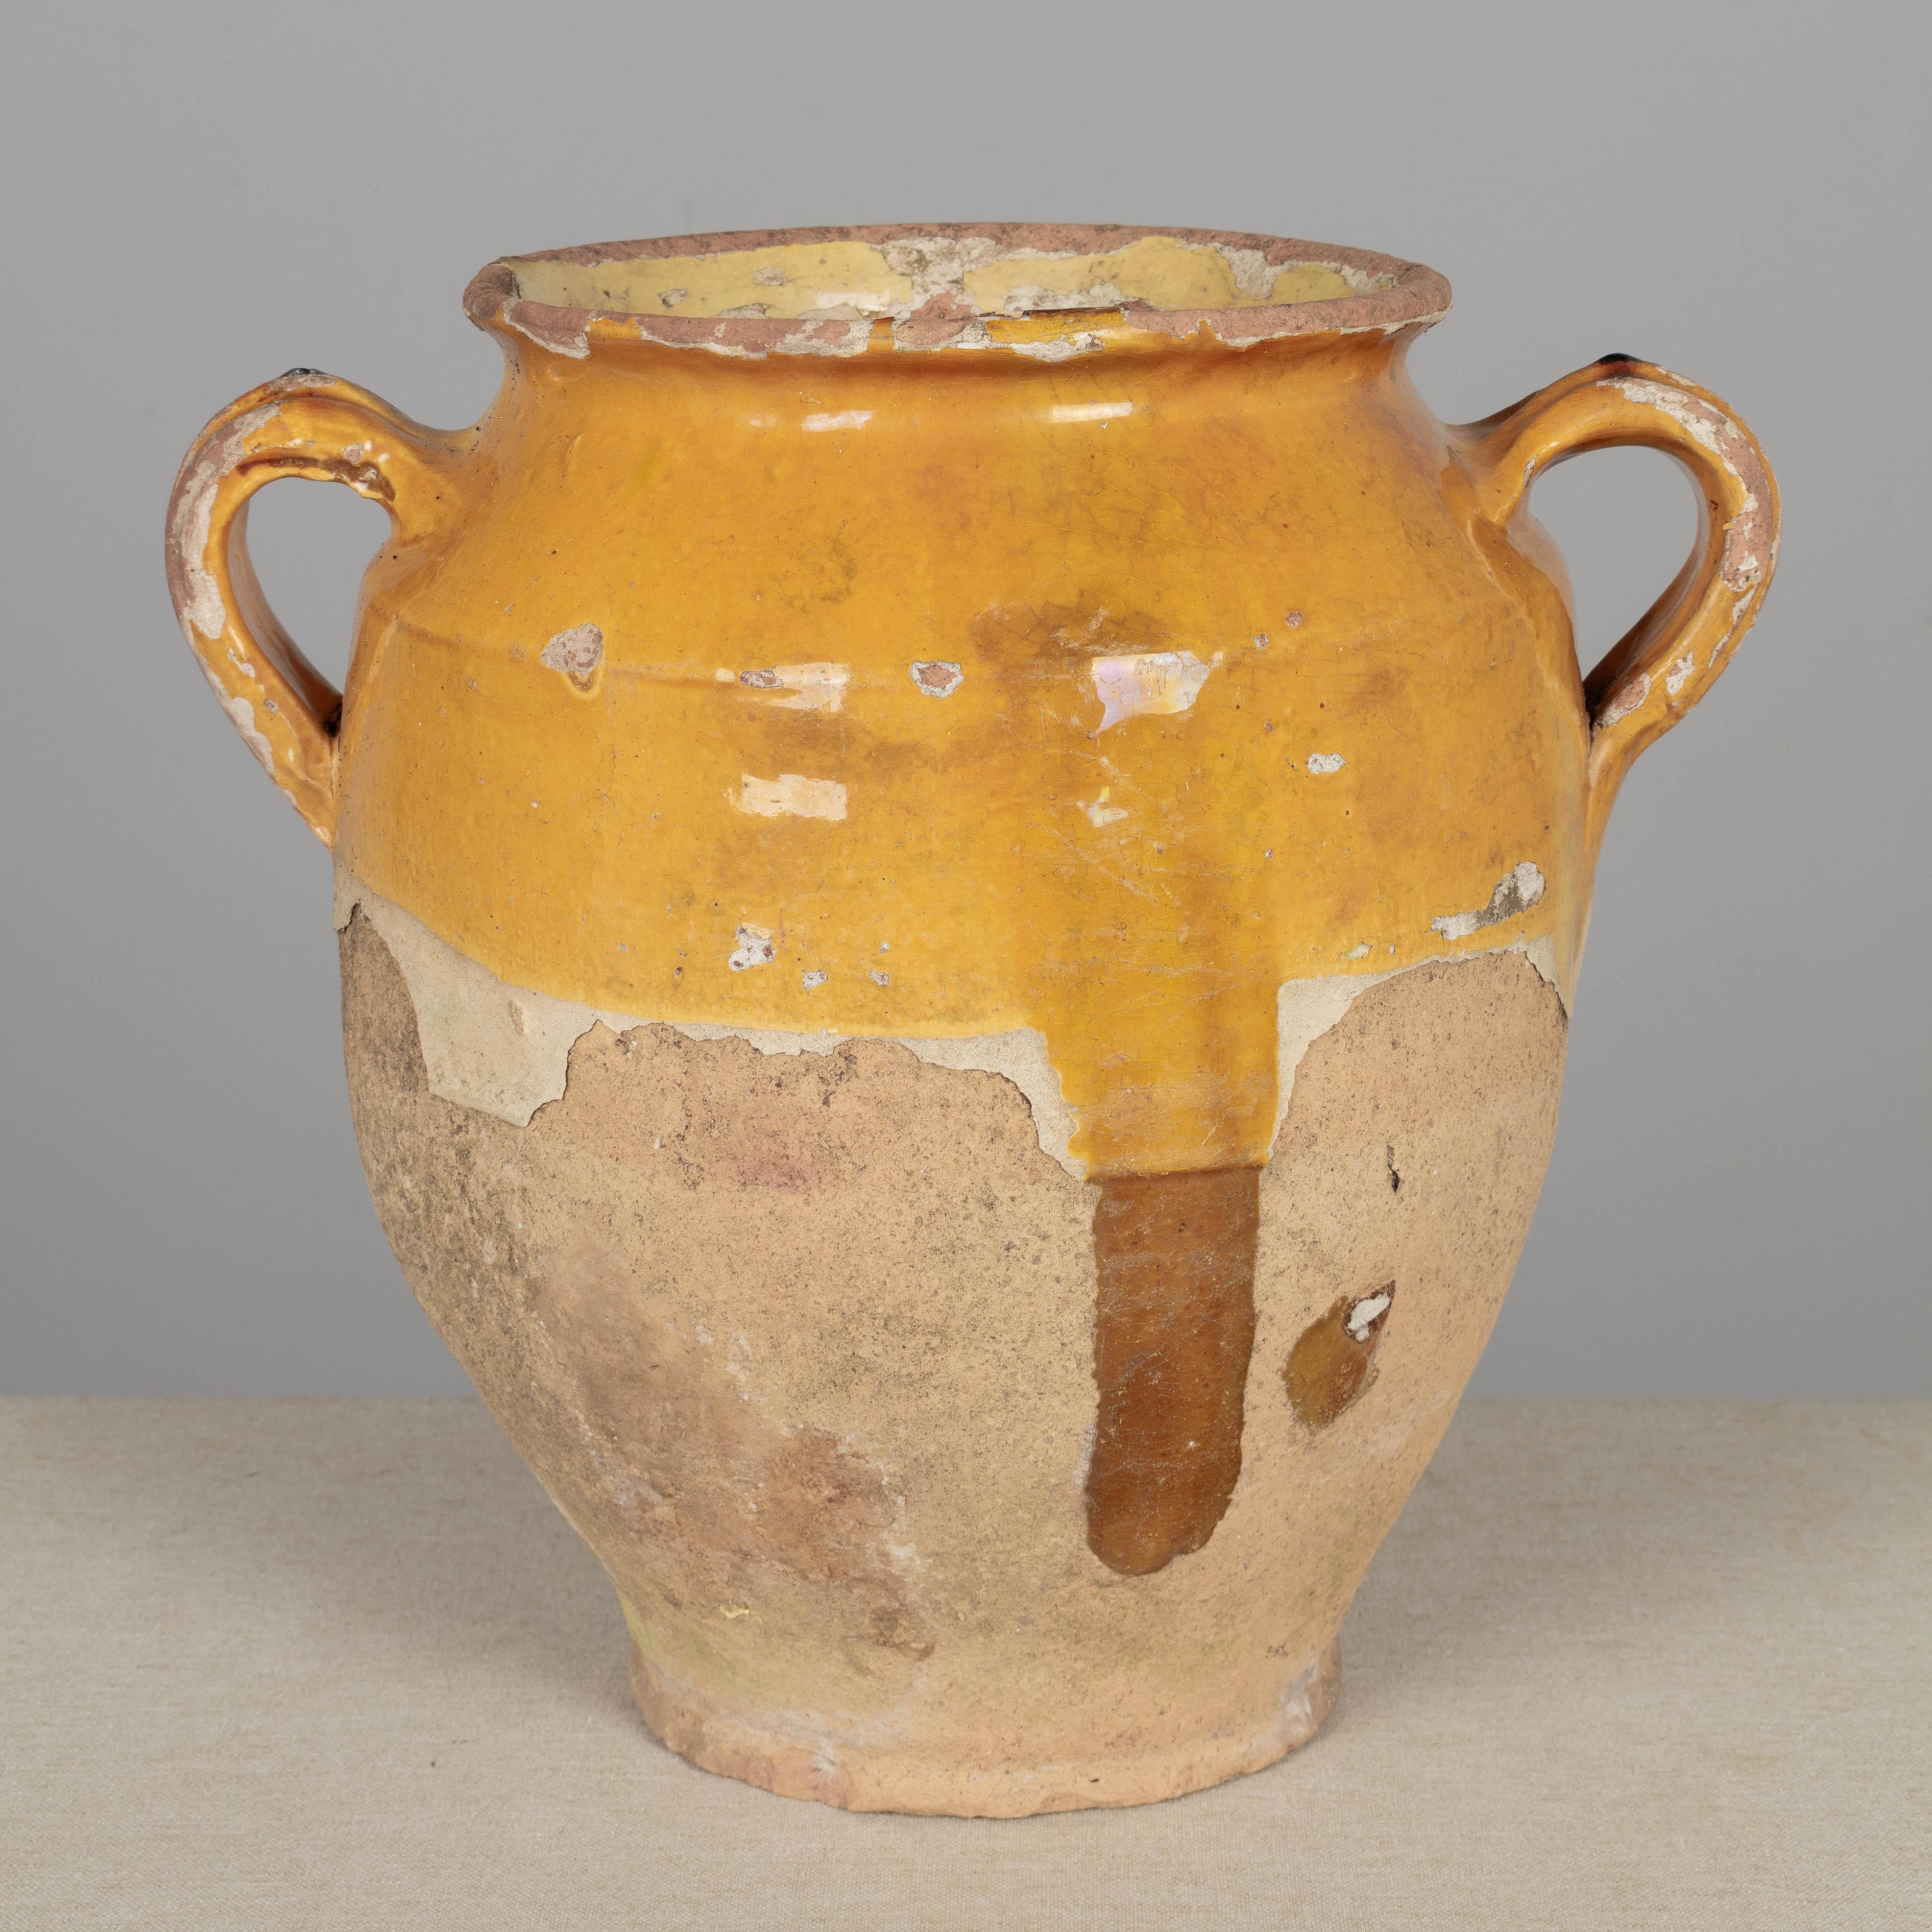 A 19th century French earthenware confit pot with traditional yellow glaze. Small drainage hole in bottom for use as a planter. Some chips and losses to glaze. These ordinary earthenware vessels were once used daily in the French country home and